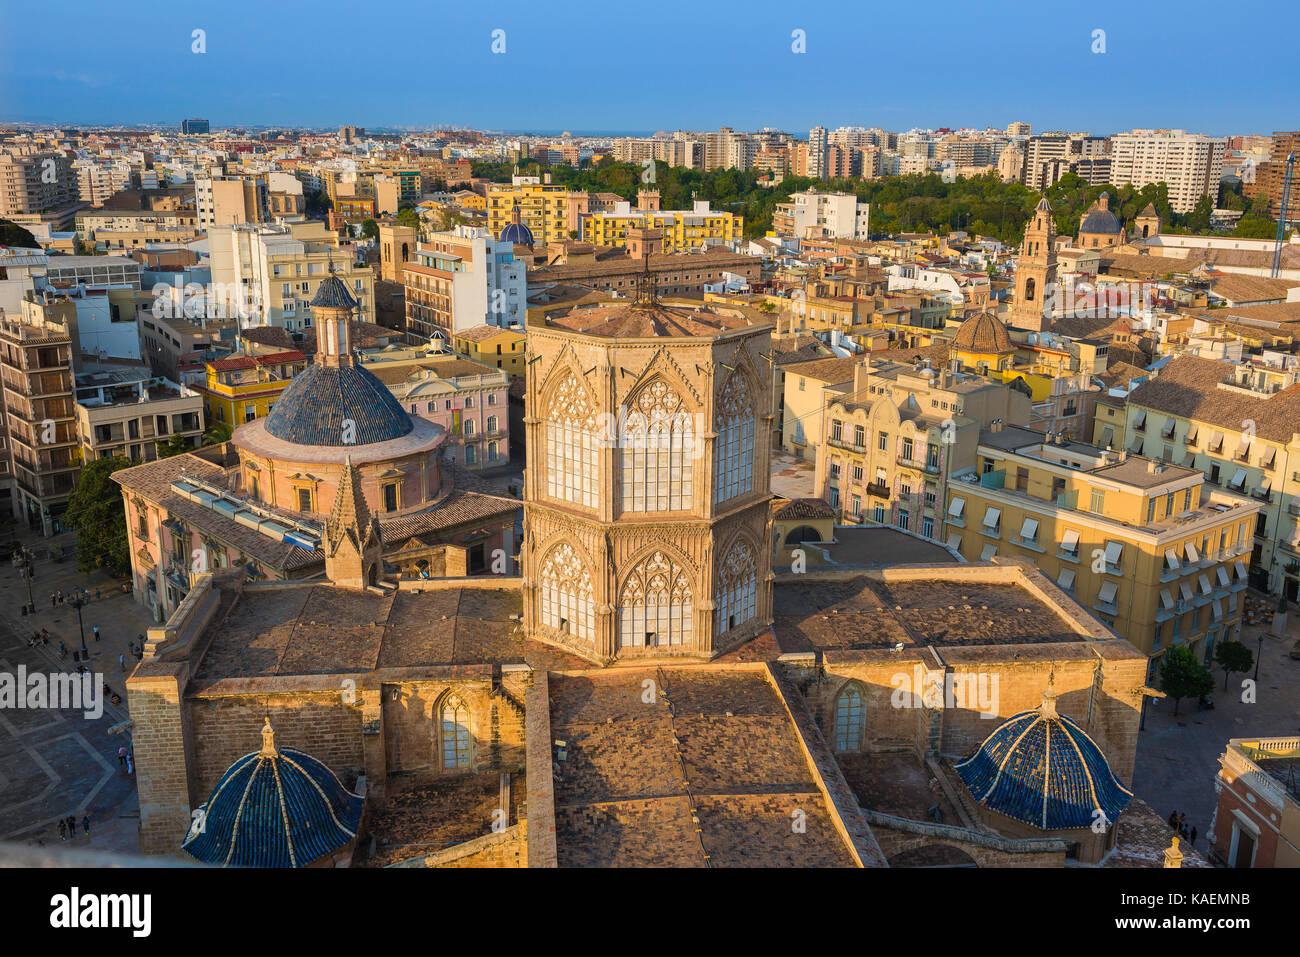 Valencia Spain city, view of the roof and medieval lantern tower of the cathedral in Valencia with the old town Barrio del Carmen area beyond, Spain. Stock Photo